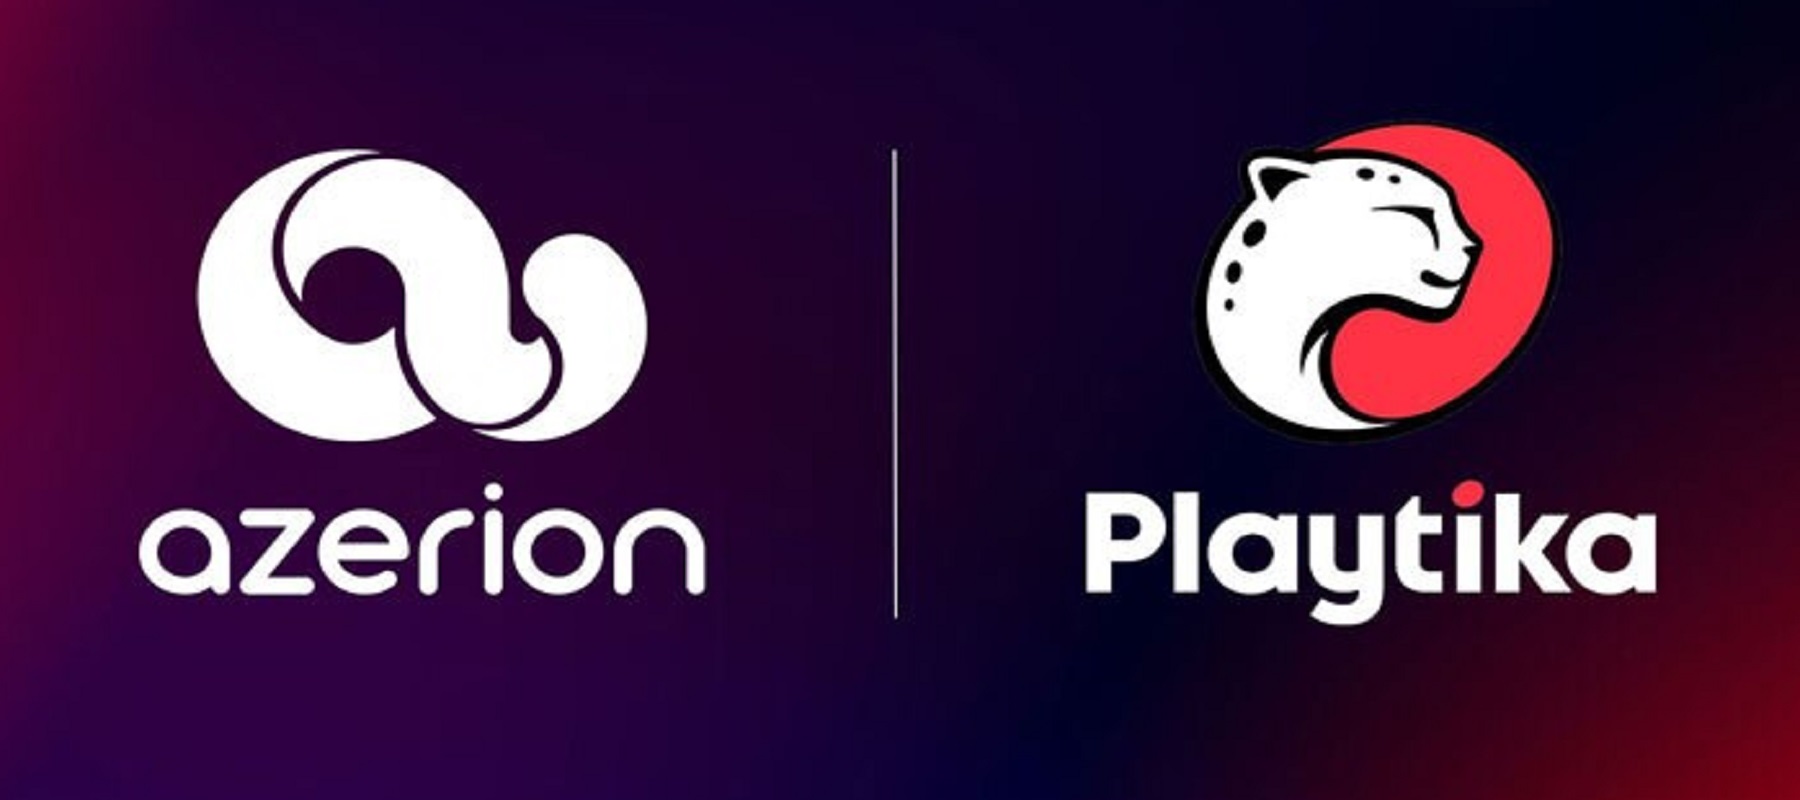 Playtika Holding enters agreement to acquire the Youda Games portfolio from Azerion